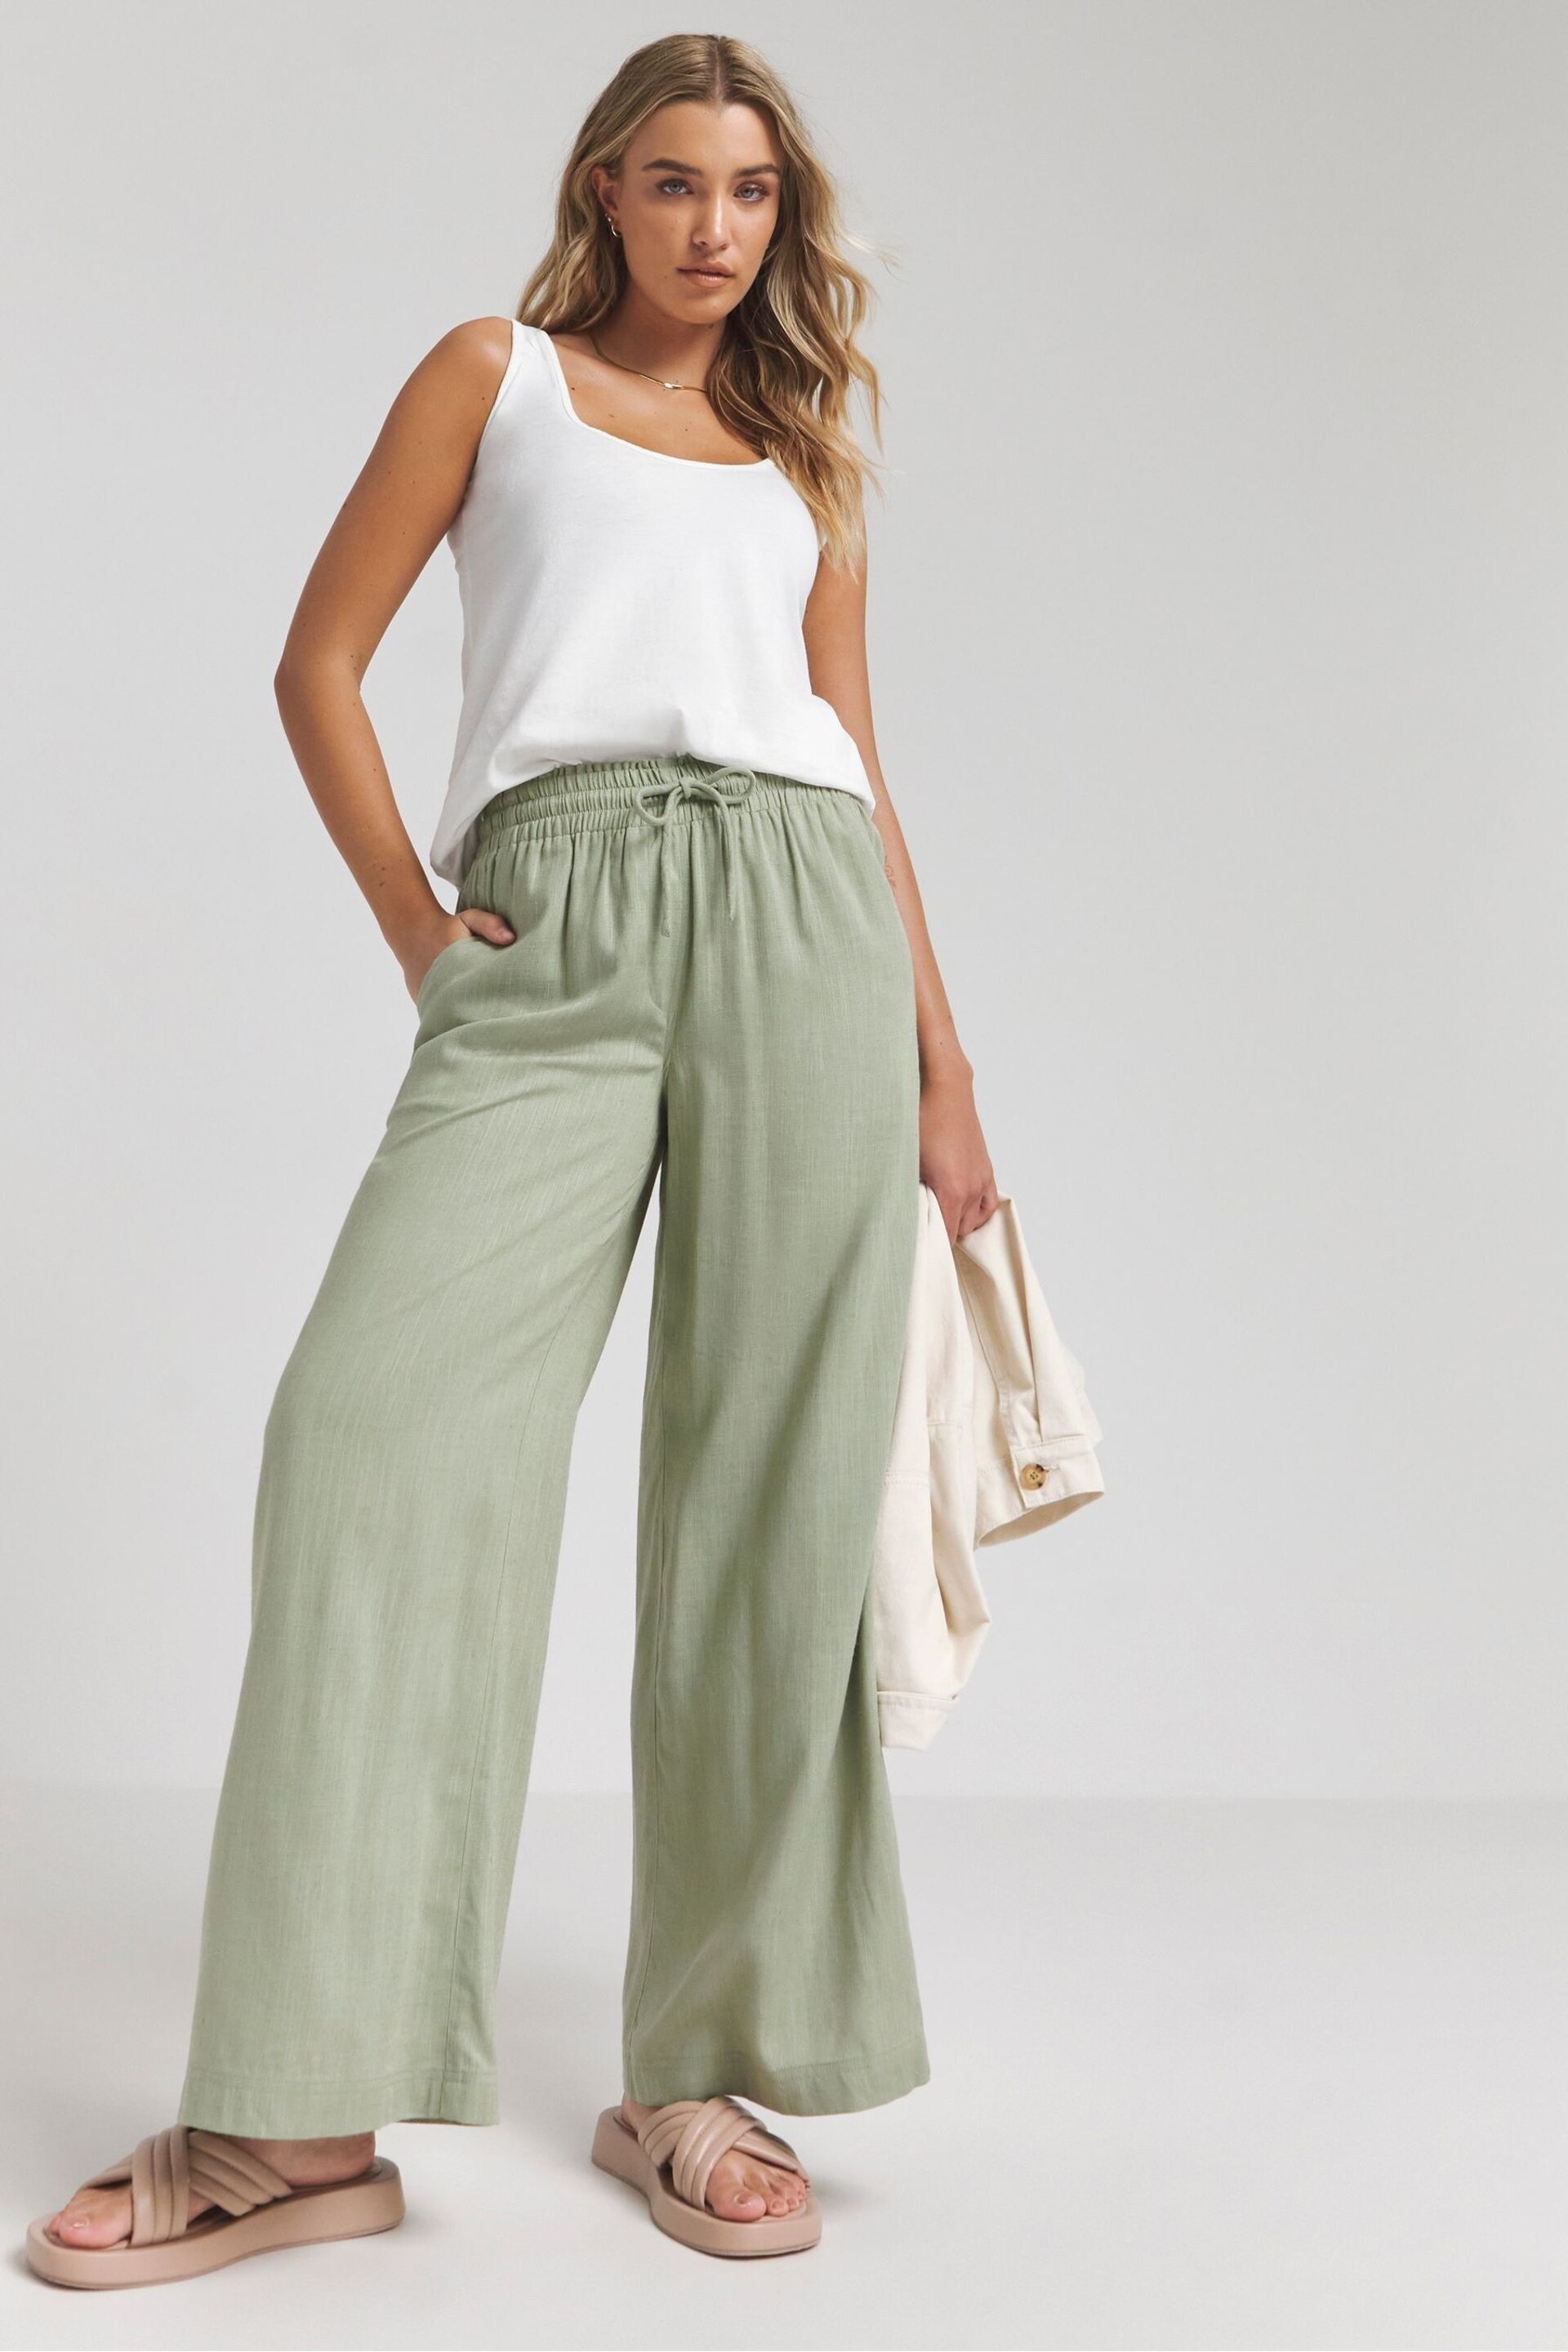 Simply Be Green Tie Waist Linen Wide Leg Trousers - Image 3 of 4